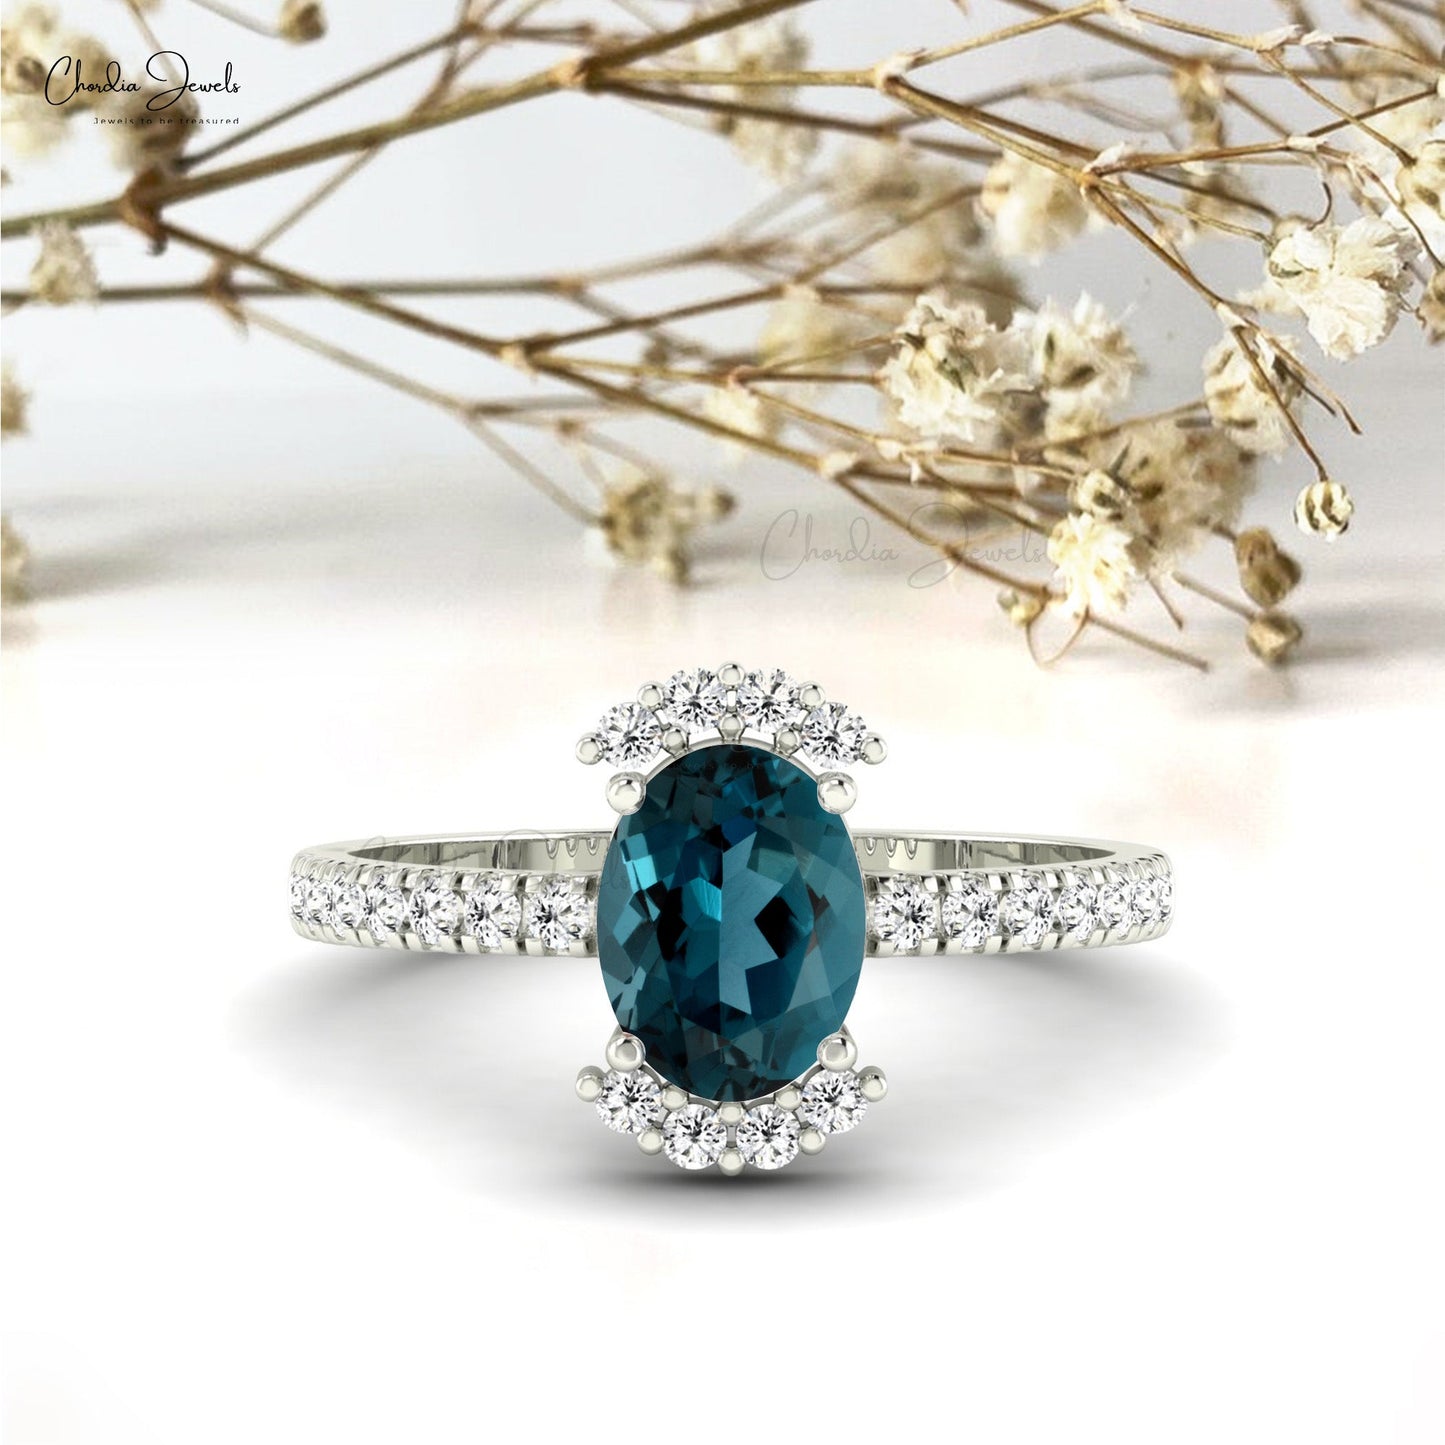 Blue Topaz Ring Diamond Accents Sterling Silver | Kay